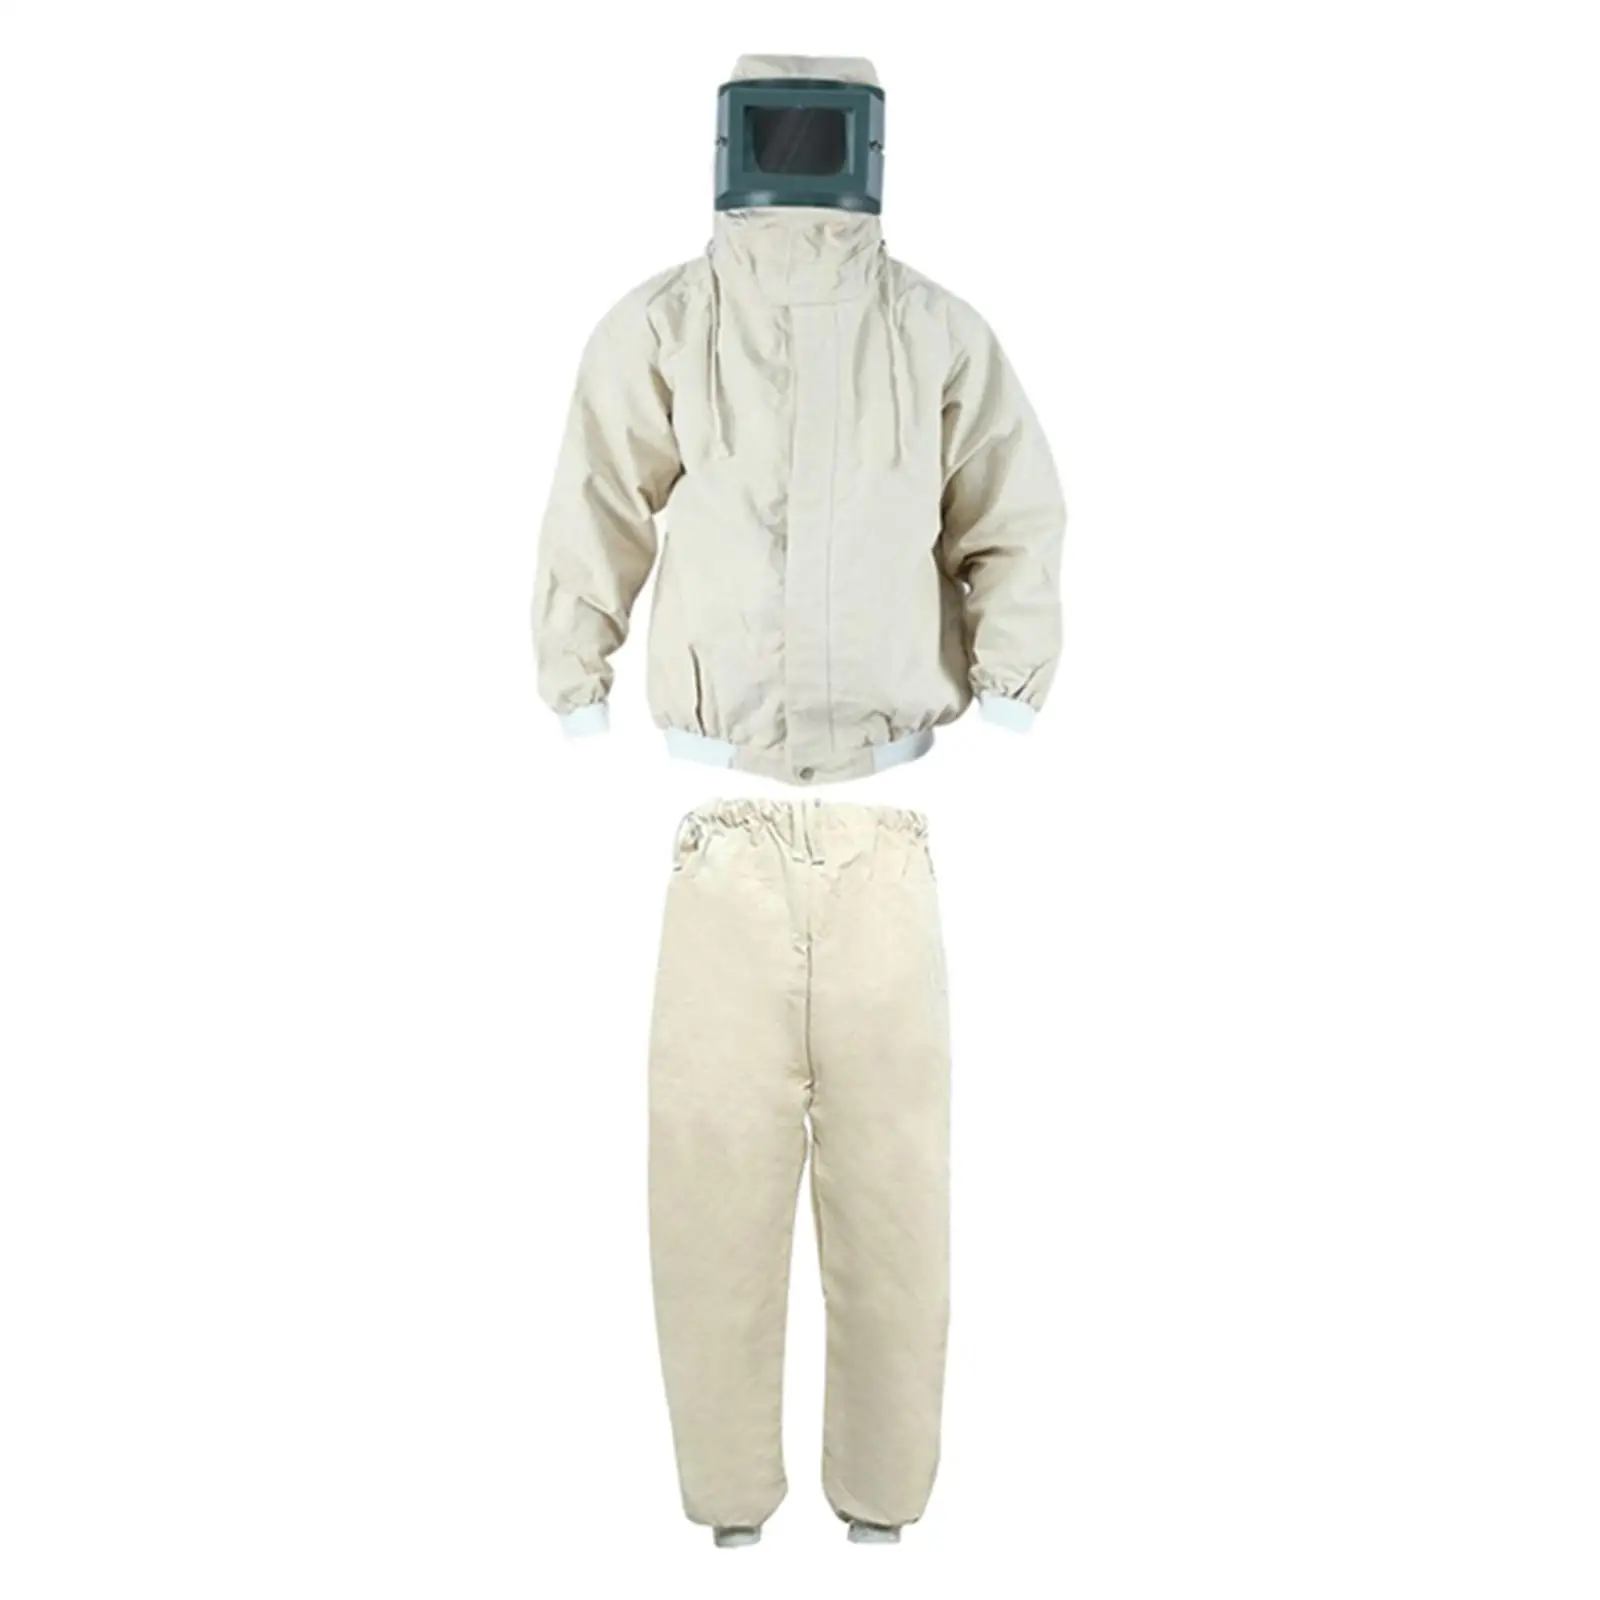 Protective Coveralls Professional Safety Work Overalls Sandblasting Clothing for Woodworking